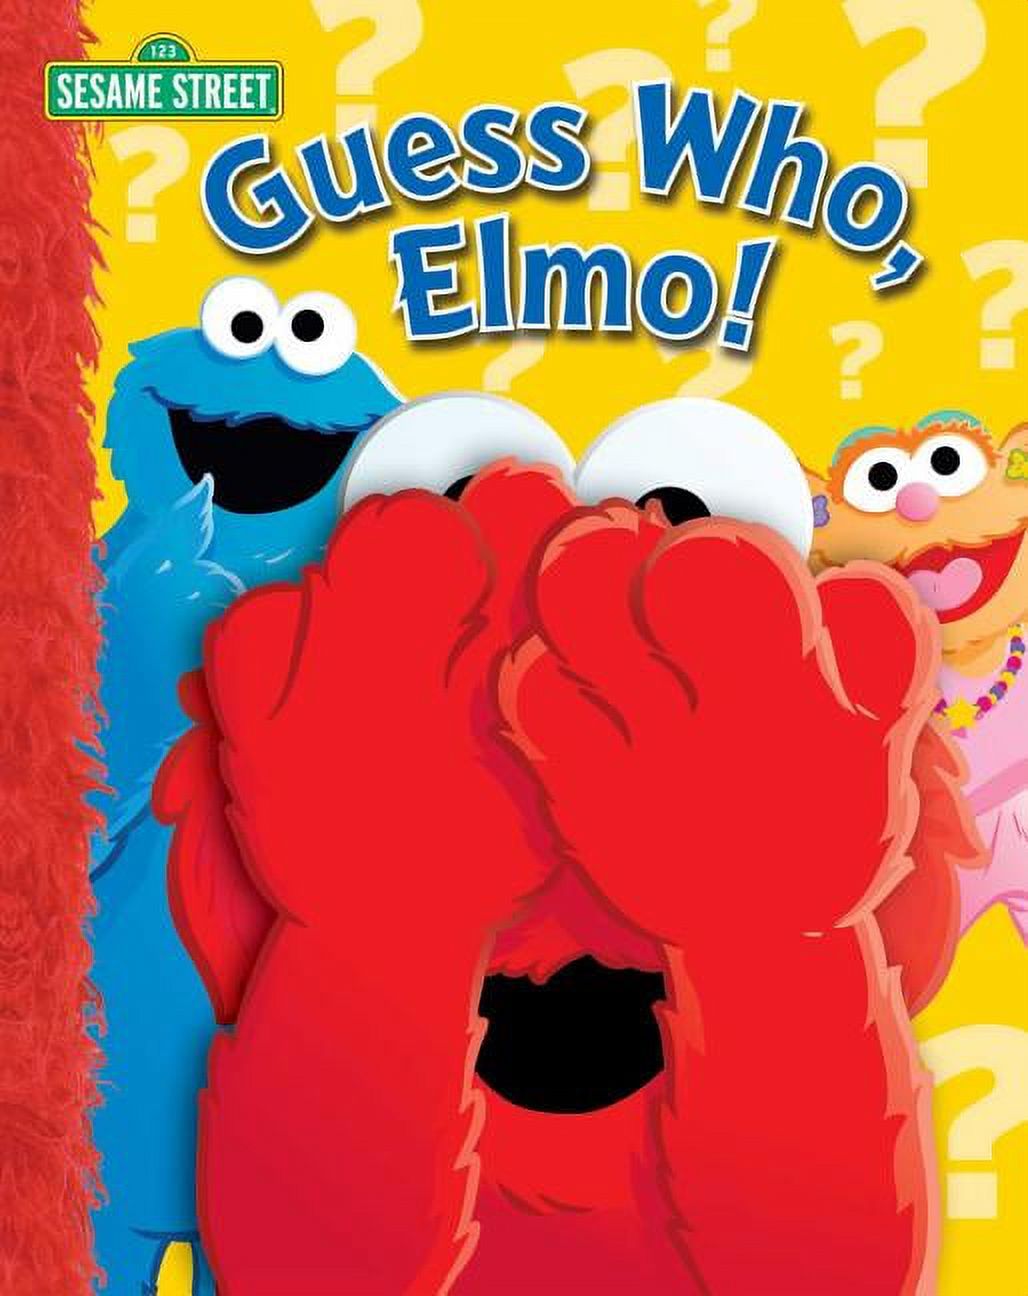 Sesame Street: Guess Who, Elmo! (Hardcover) by Sesame Street, Wendy Wax - image 1 of 1